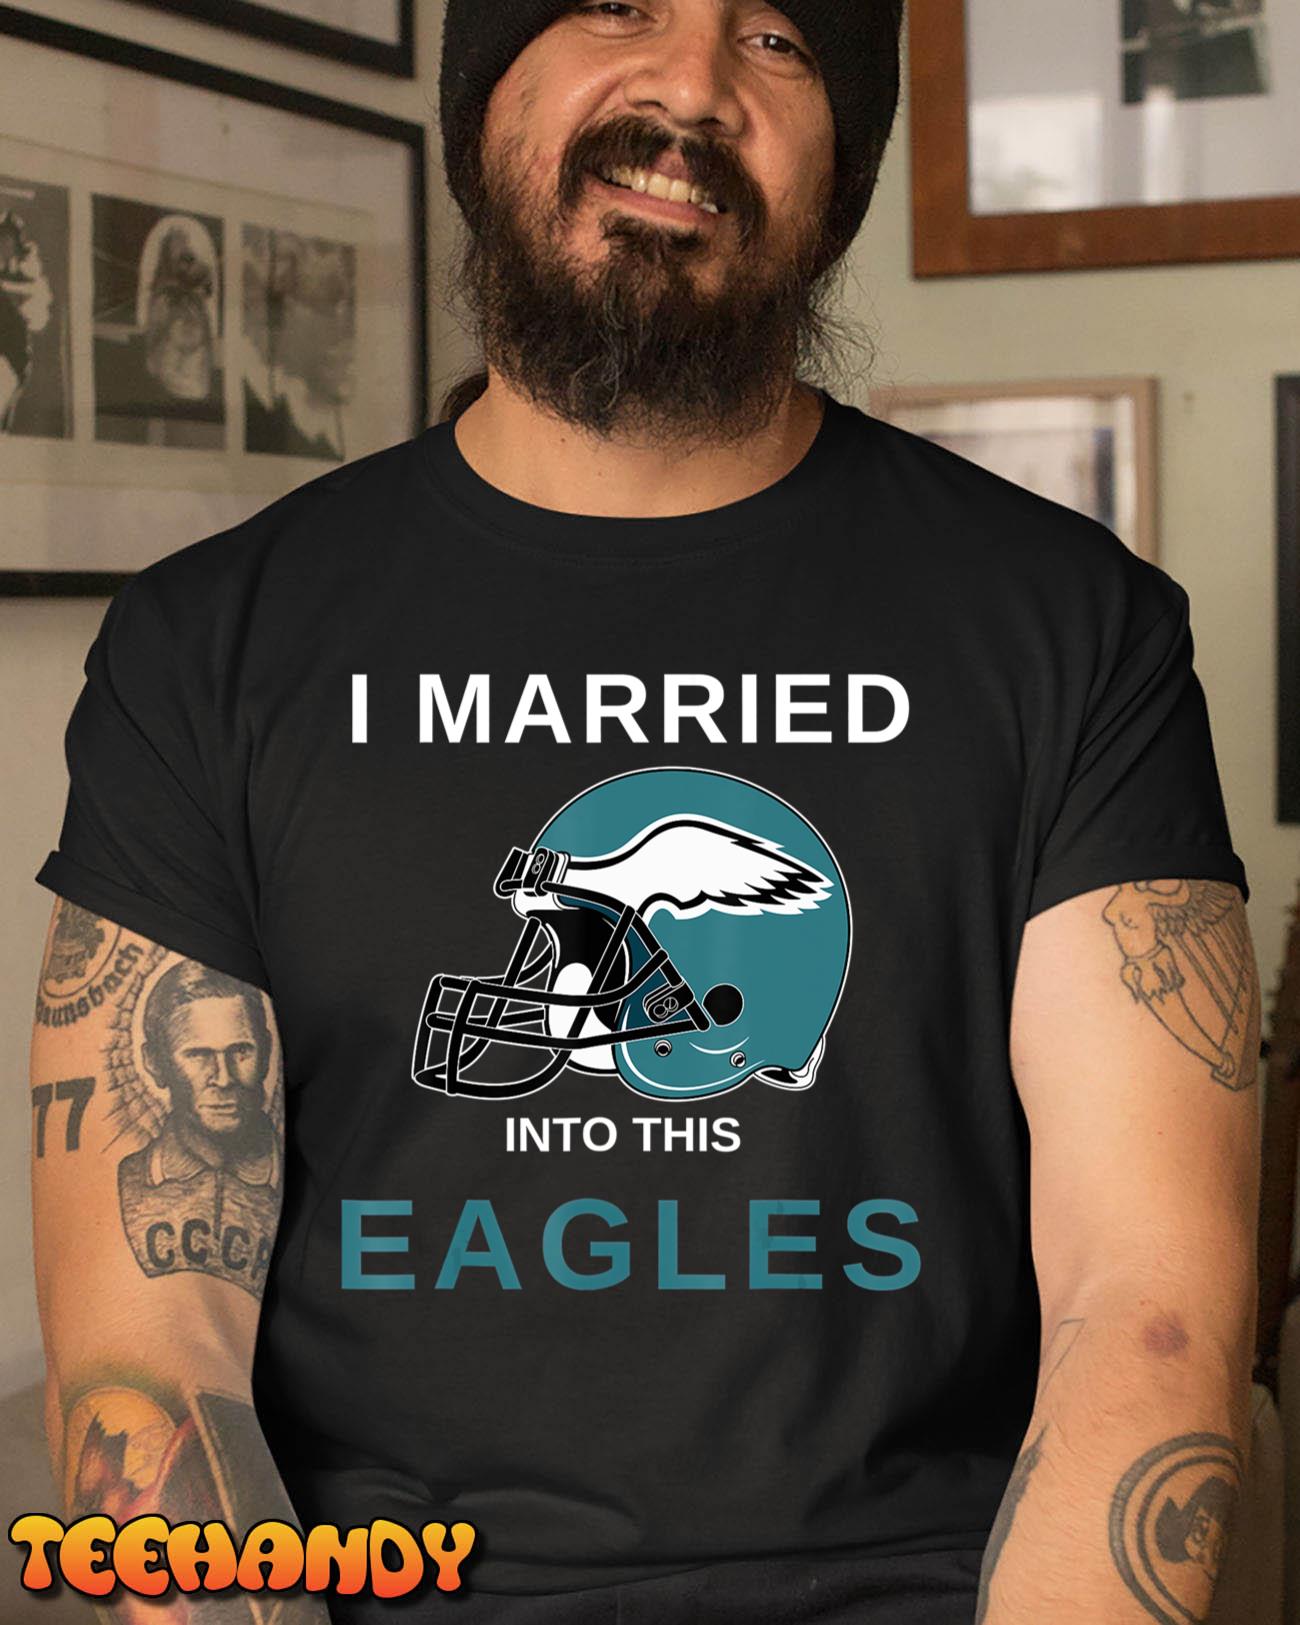 I Married Into This Eagles Funny Design Quote T-Shirt